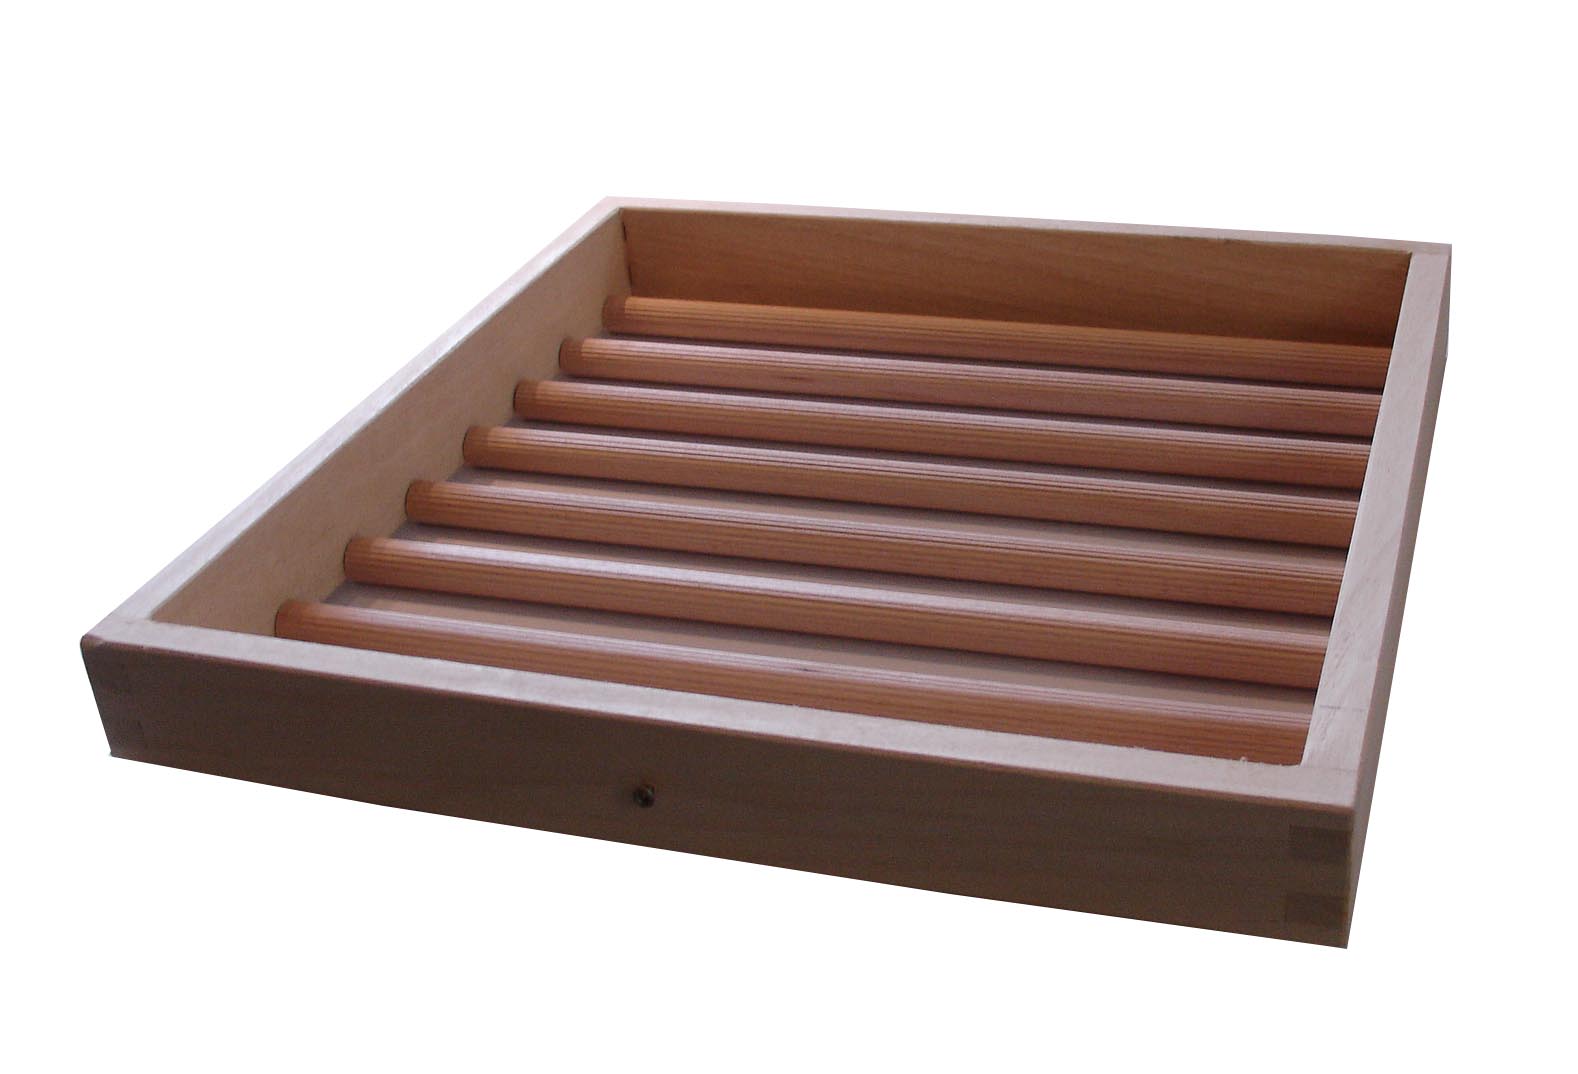 Surcharge: choice of tray (size 5, wooden)